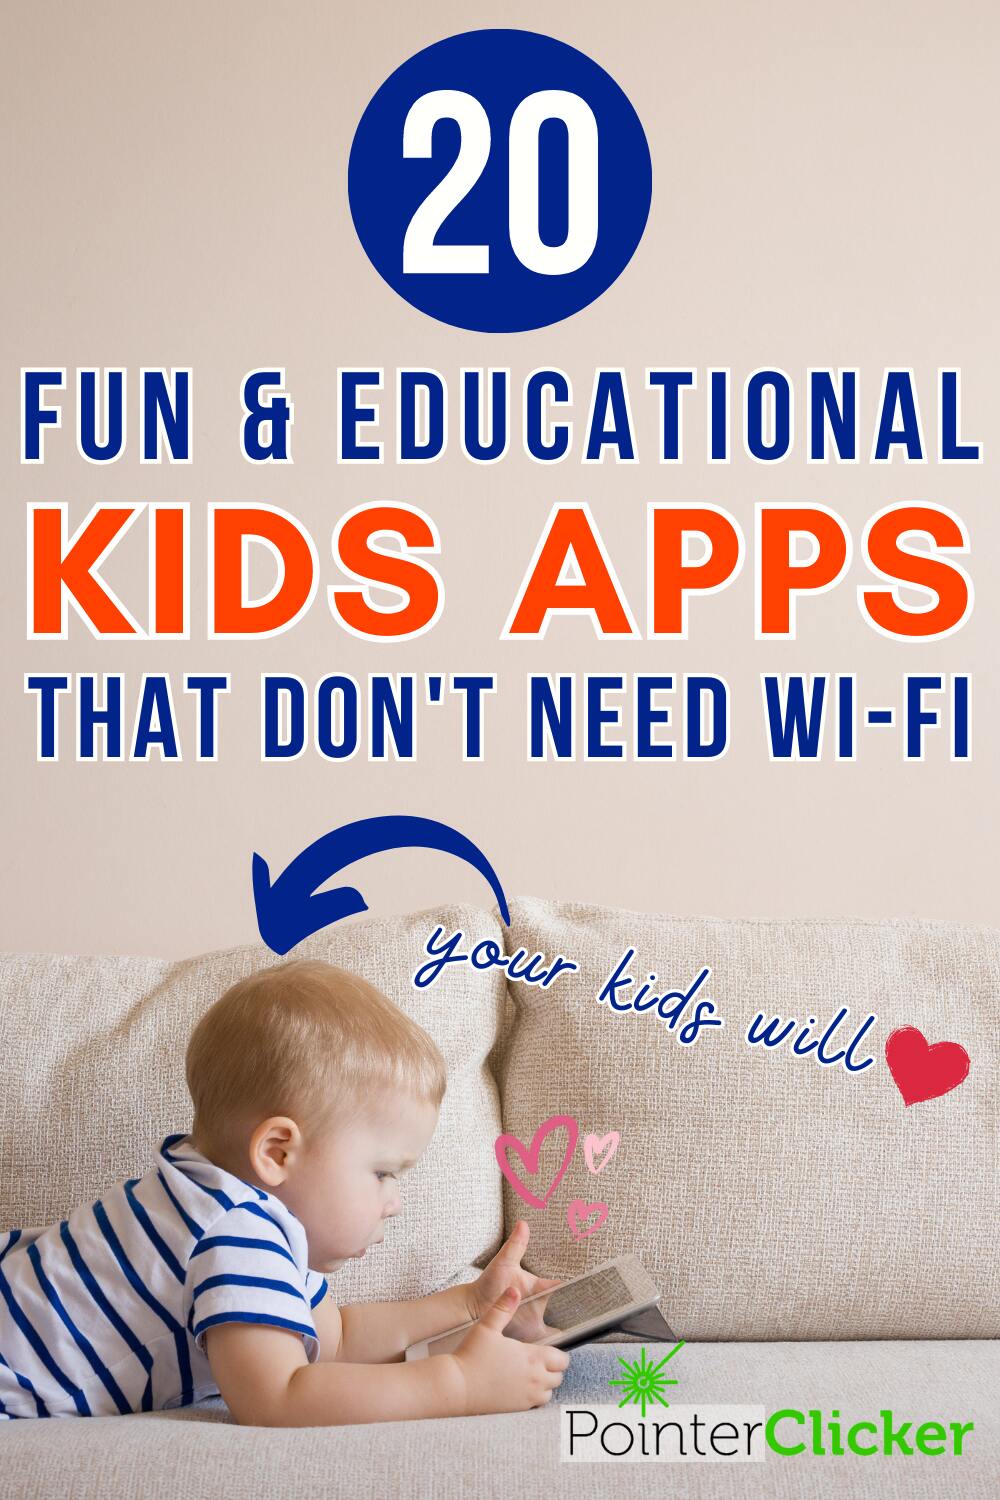 kid is lying on a couch and is playing on his ipad. The words say: '20 fun & educational kids apps that don't need wifi '